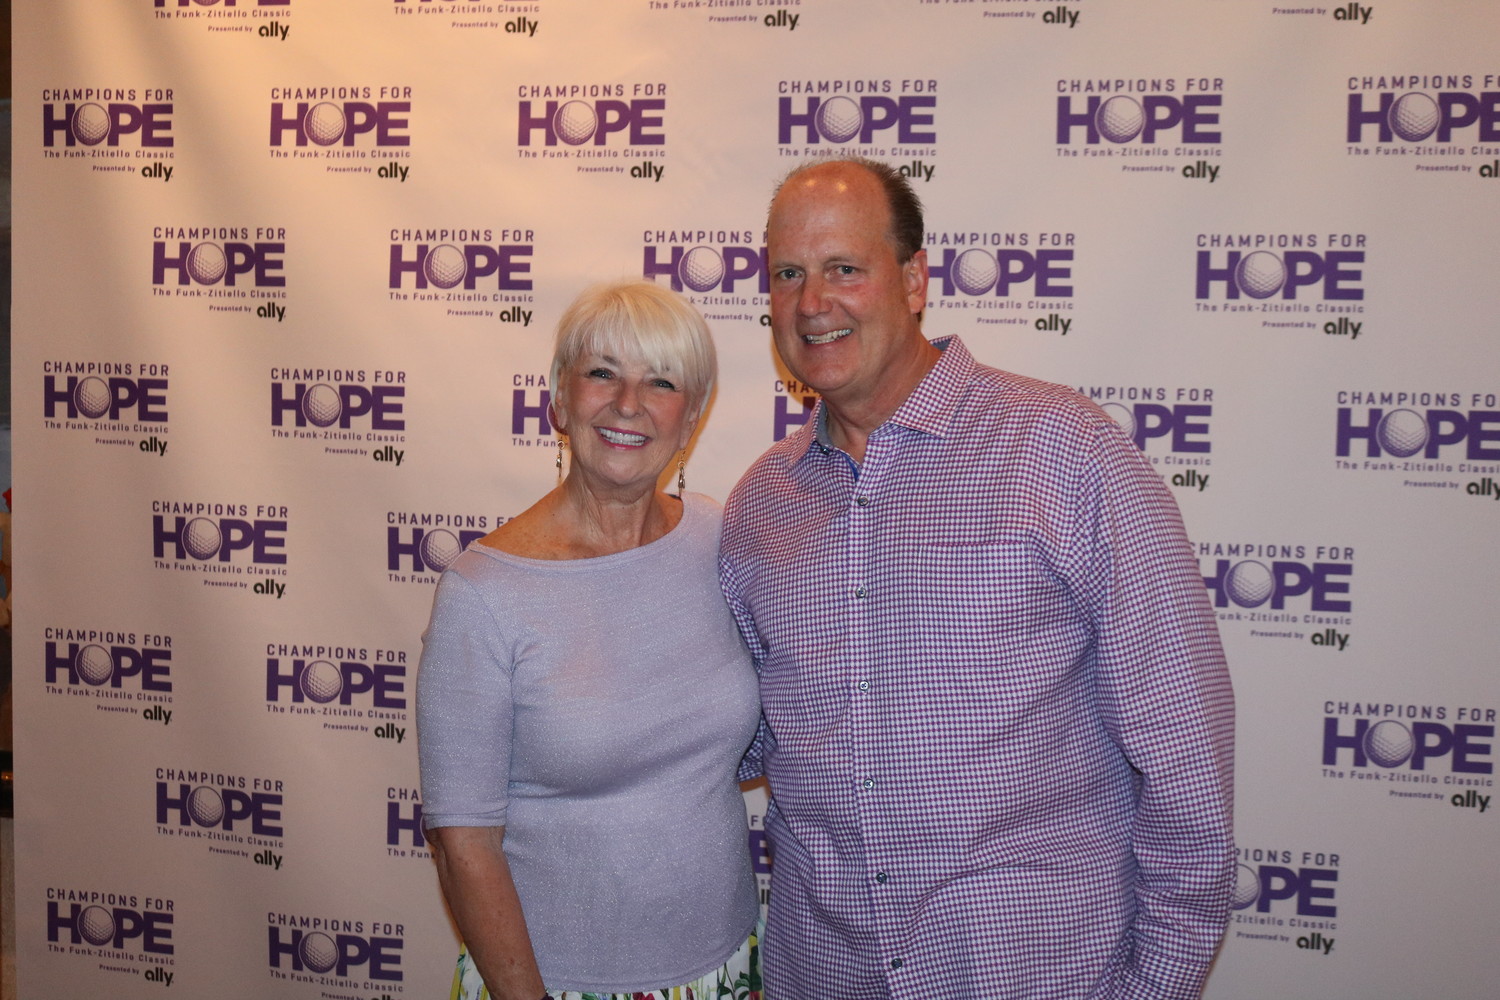 Judi and Tommy Zitiello pose for a photo at the Champions for Hope gala at TPC Sawgrass on Friday, June 15.